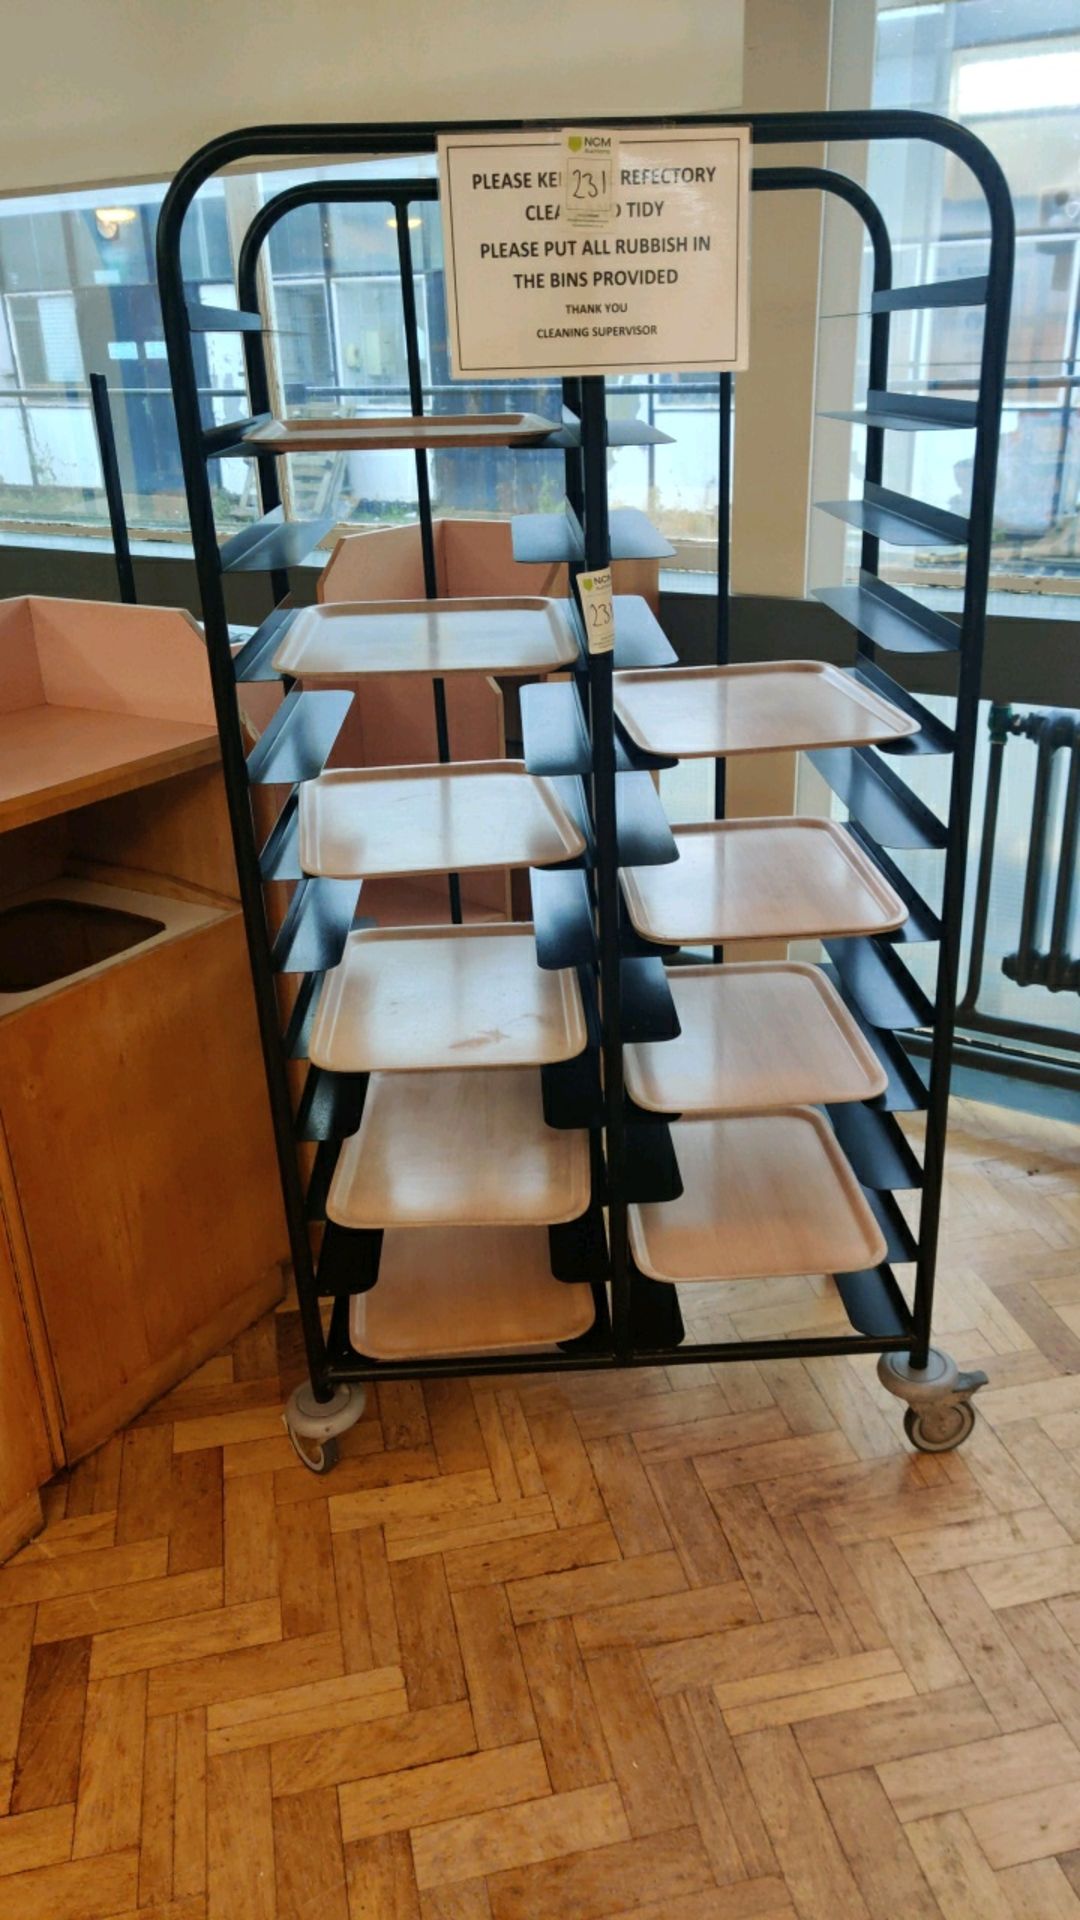 Canteen furniture - Image 6 of 6